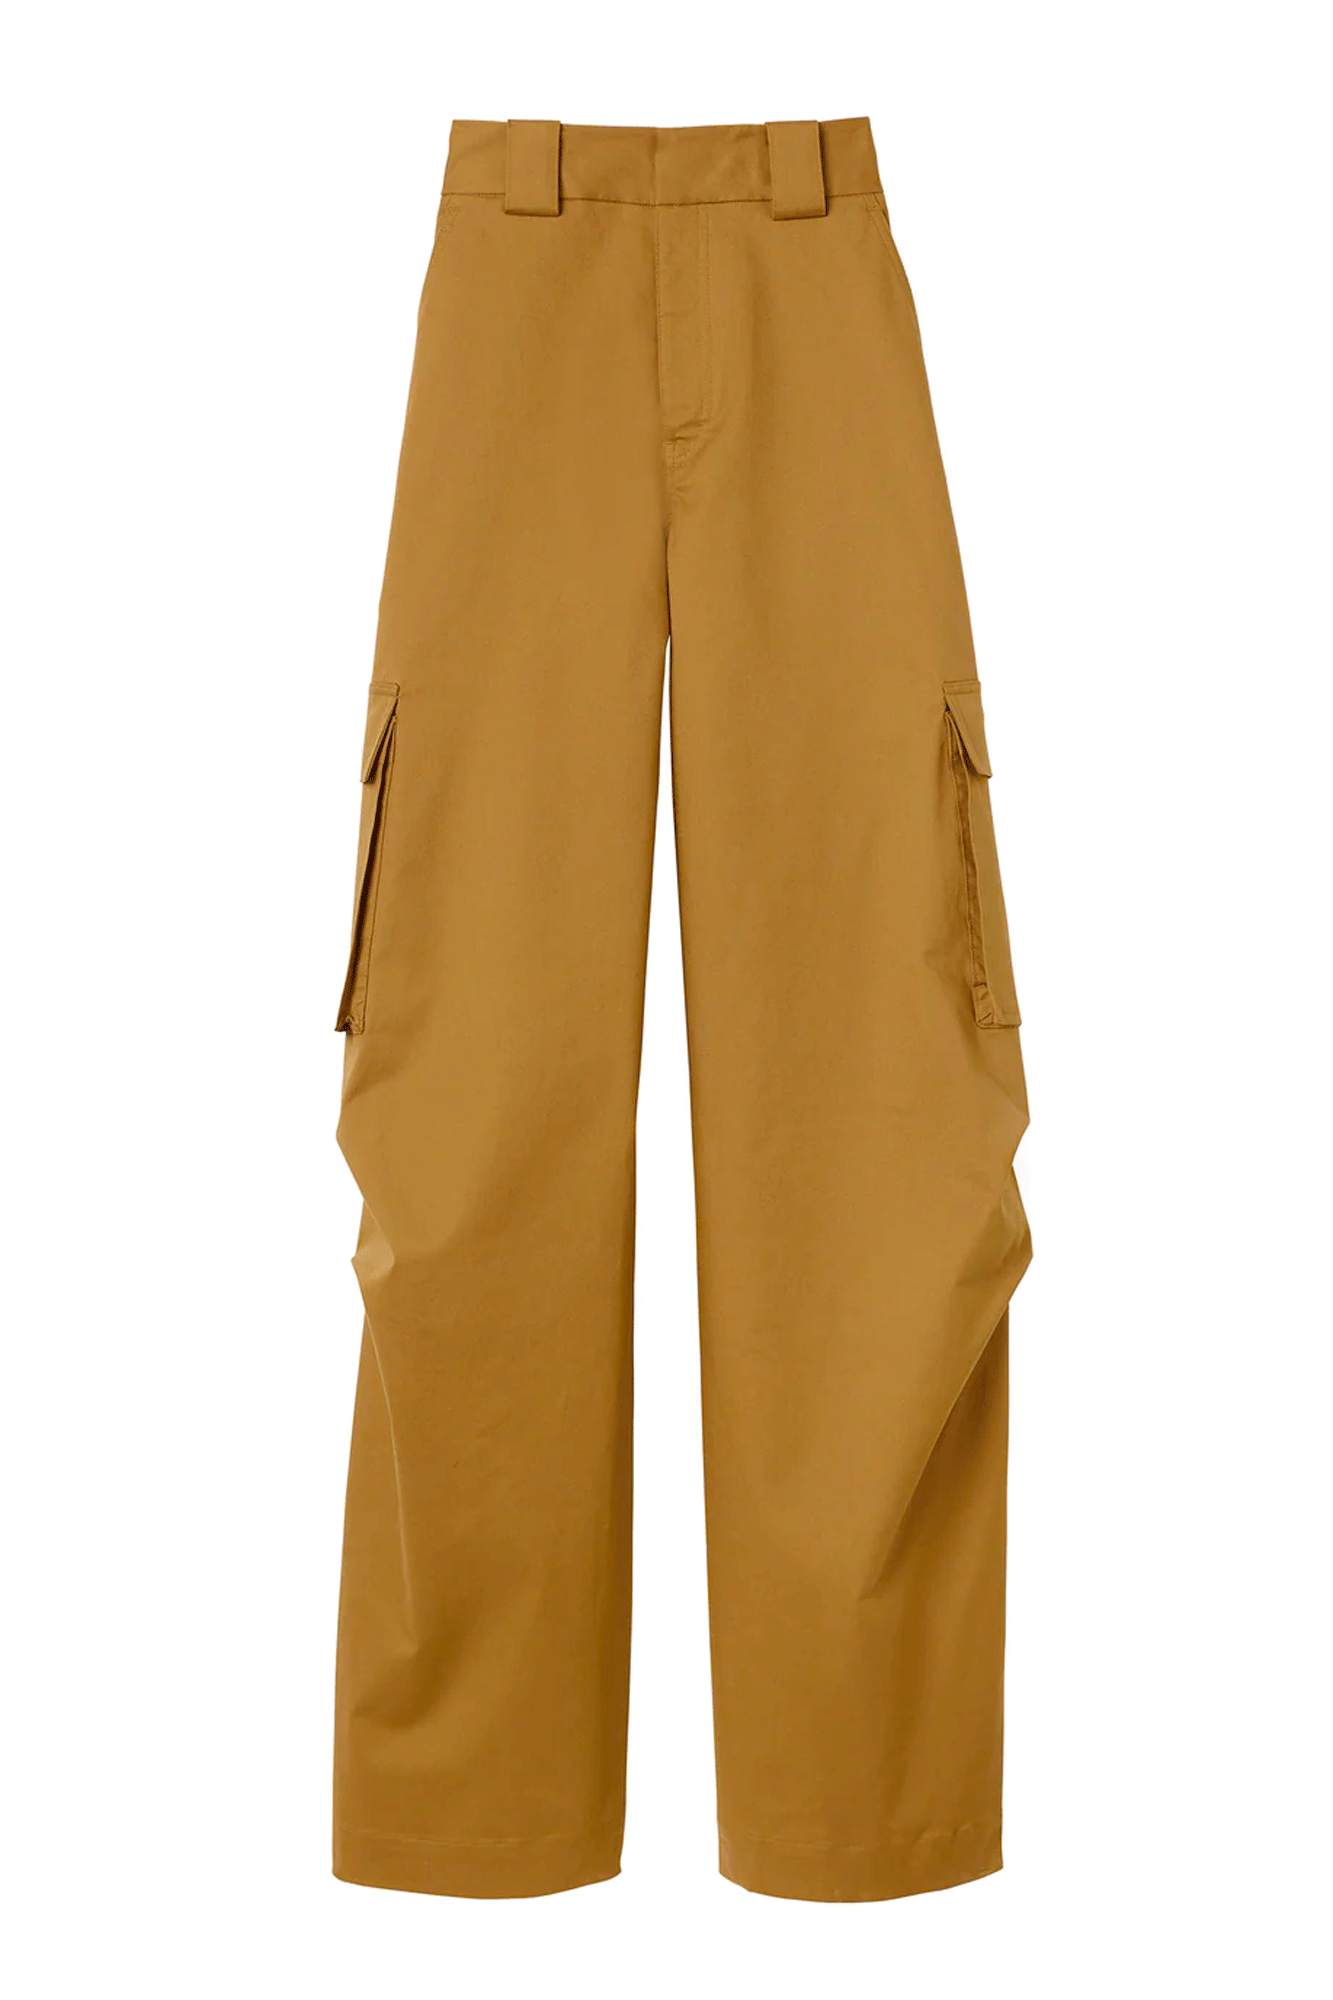 The Brie Pant from A.L.C. is crafted from premium compact stretch cotton fabric for a comfortable and sturdy fit. 